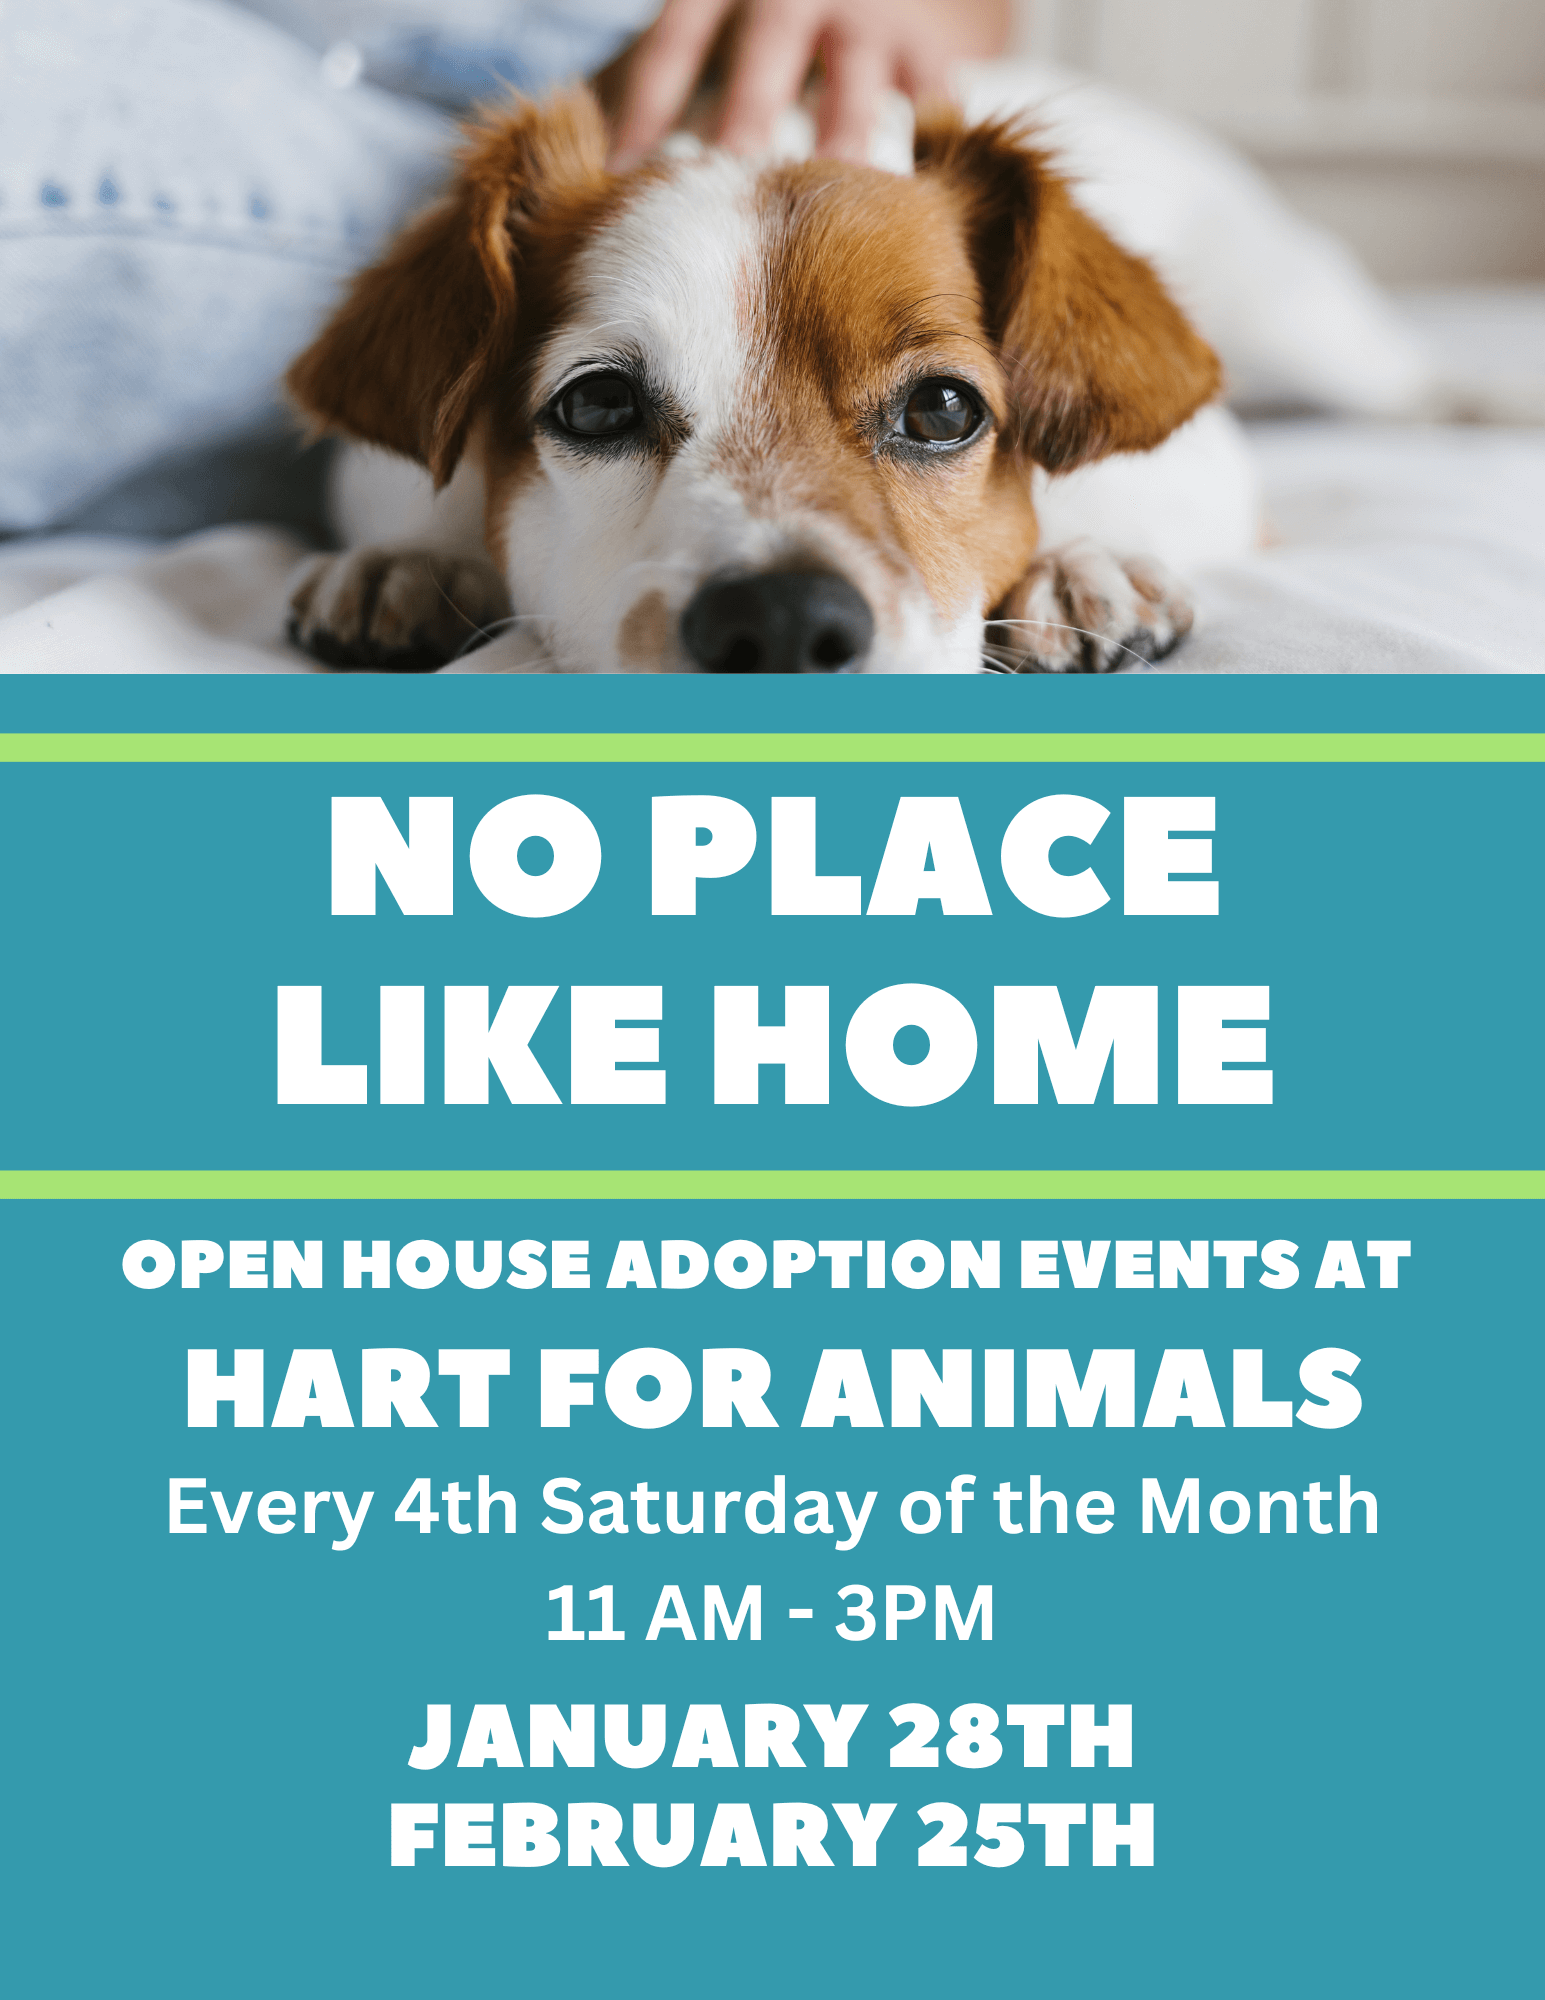 Open House at HART: "No Place Like Home"